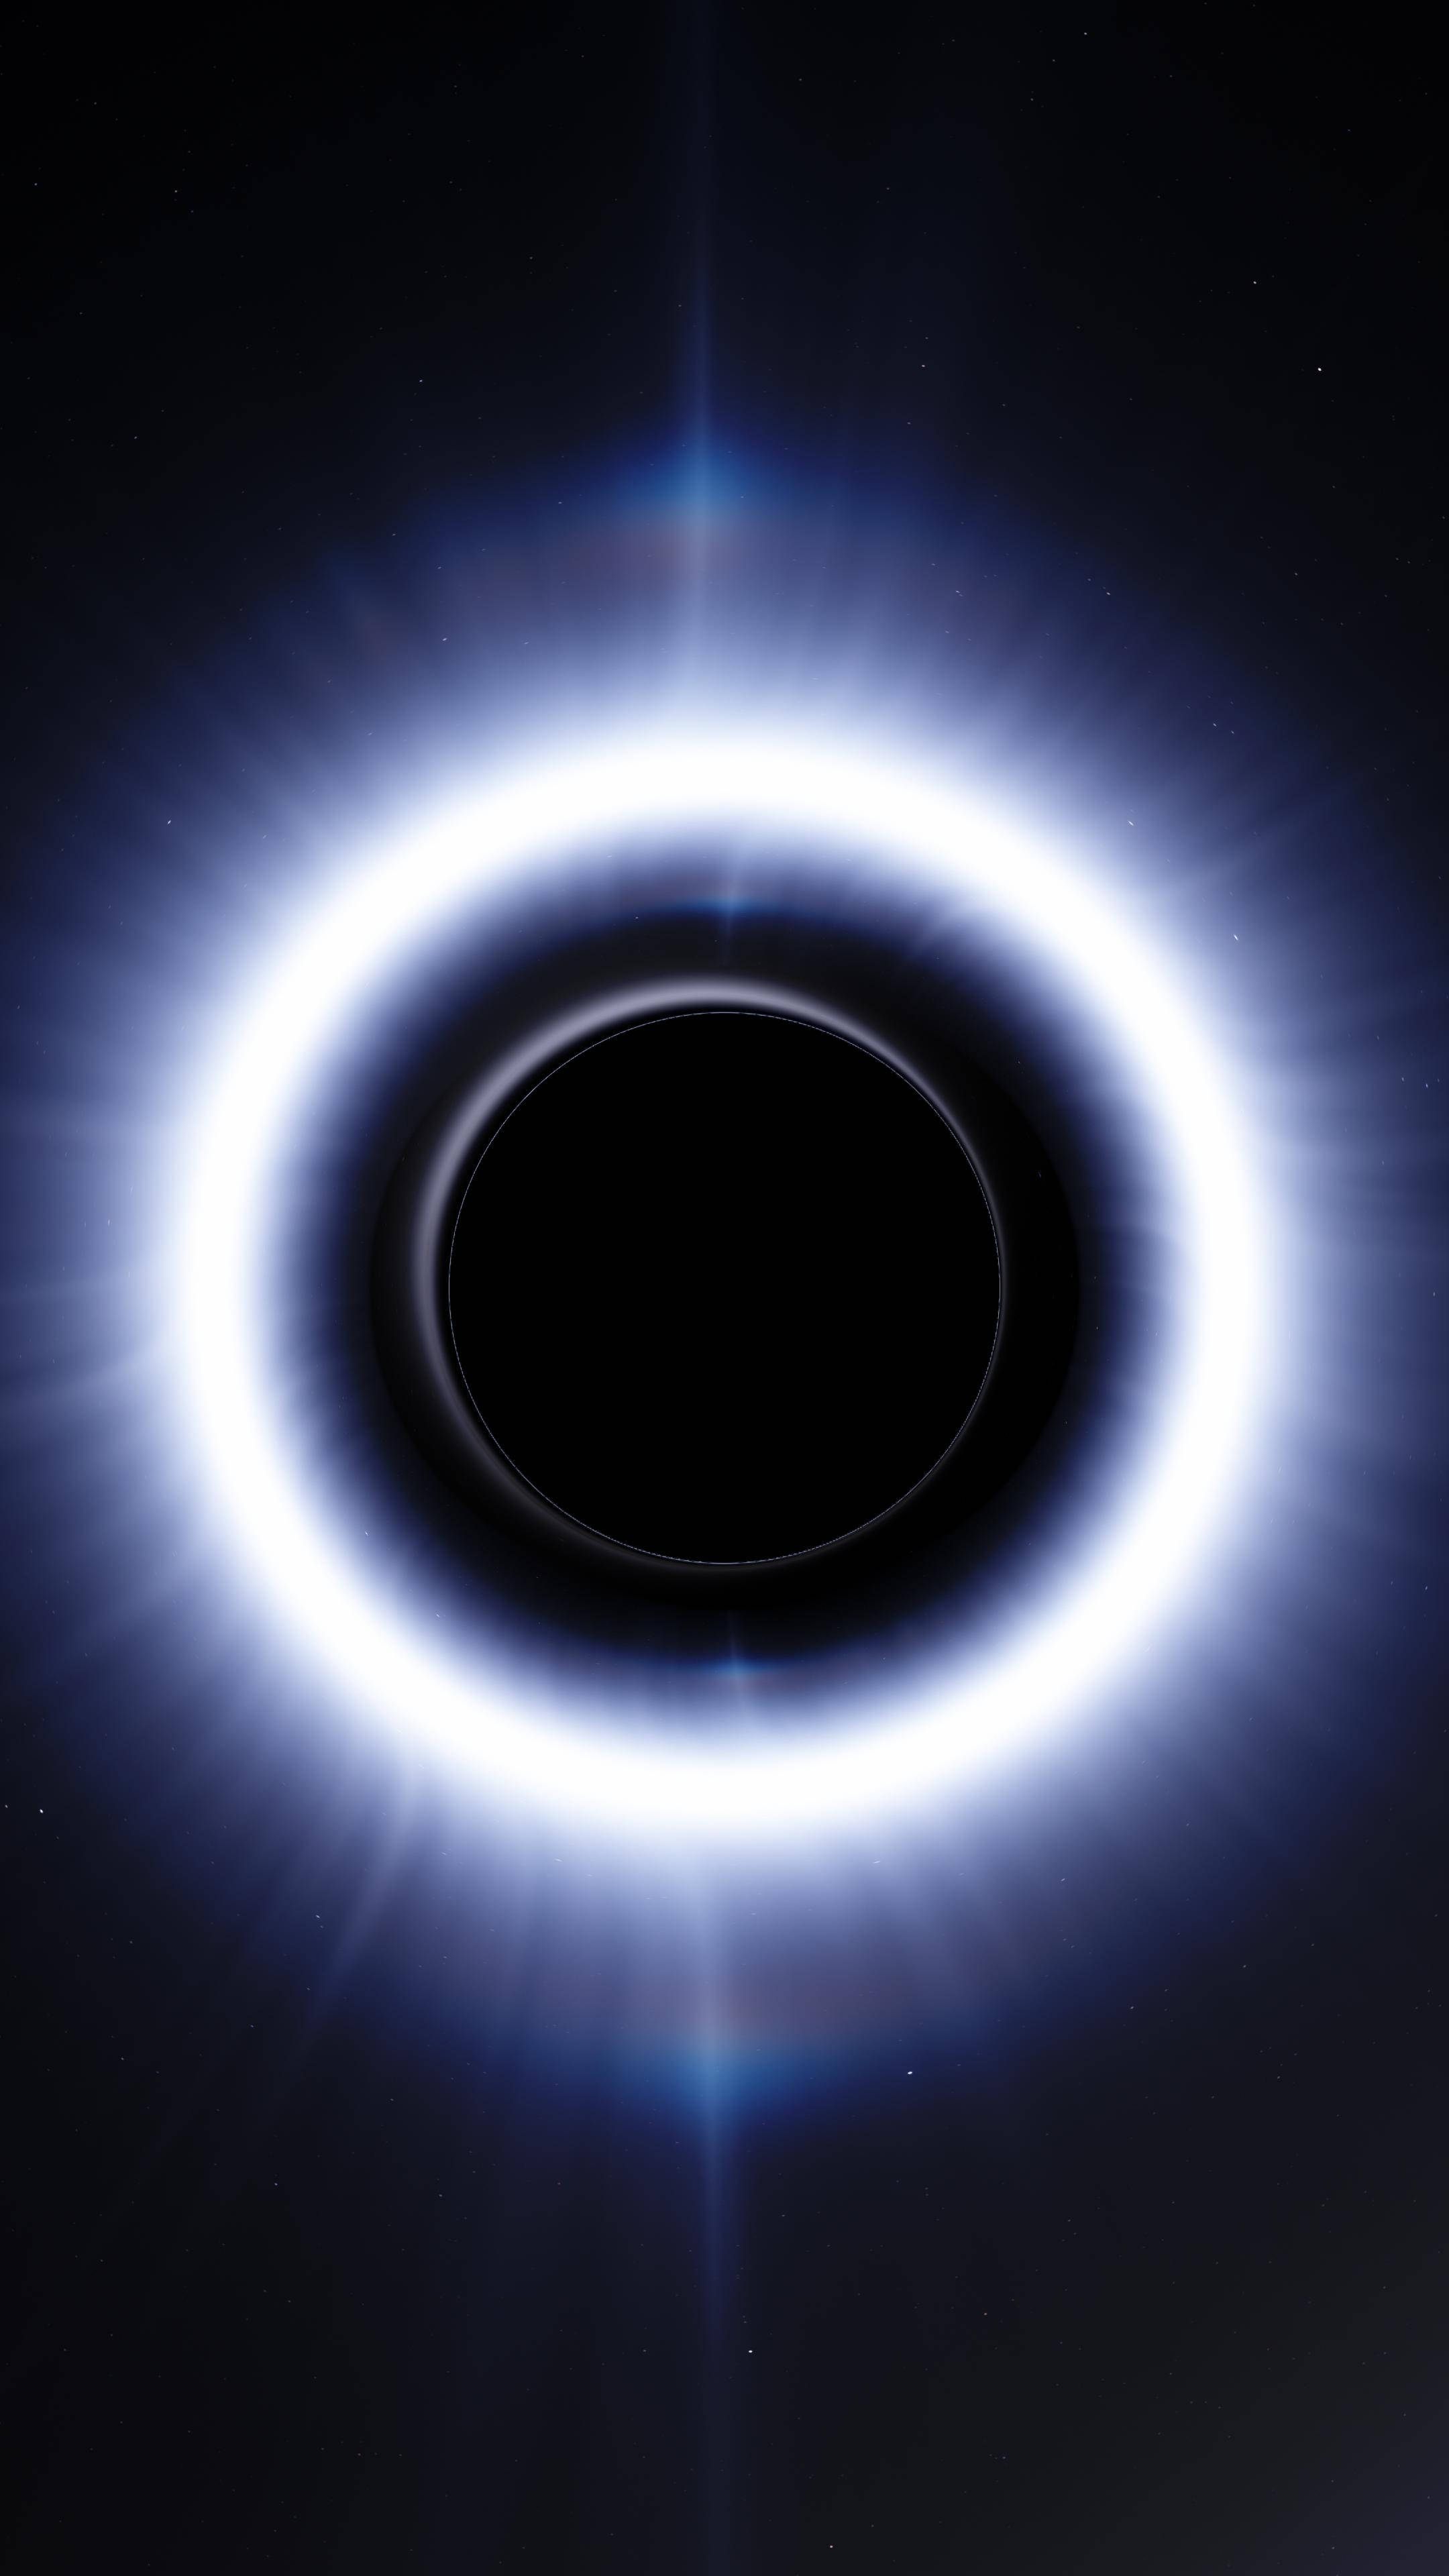 Contrasting Bright Light In Black Hole Background